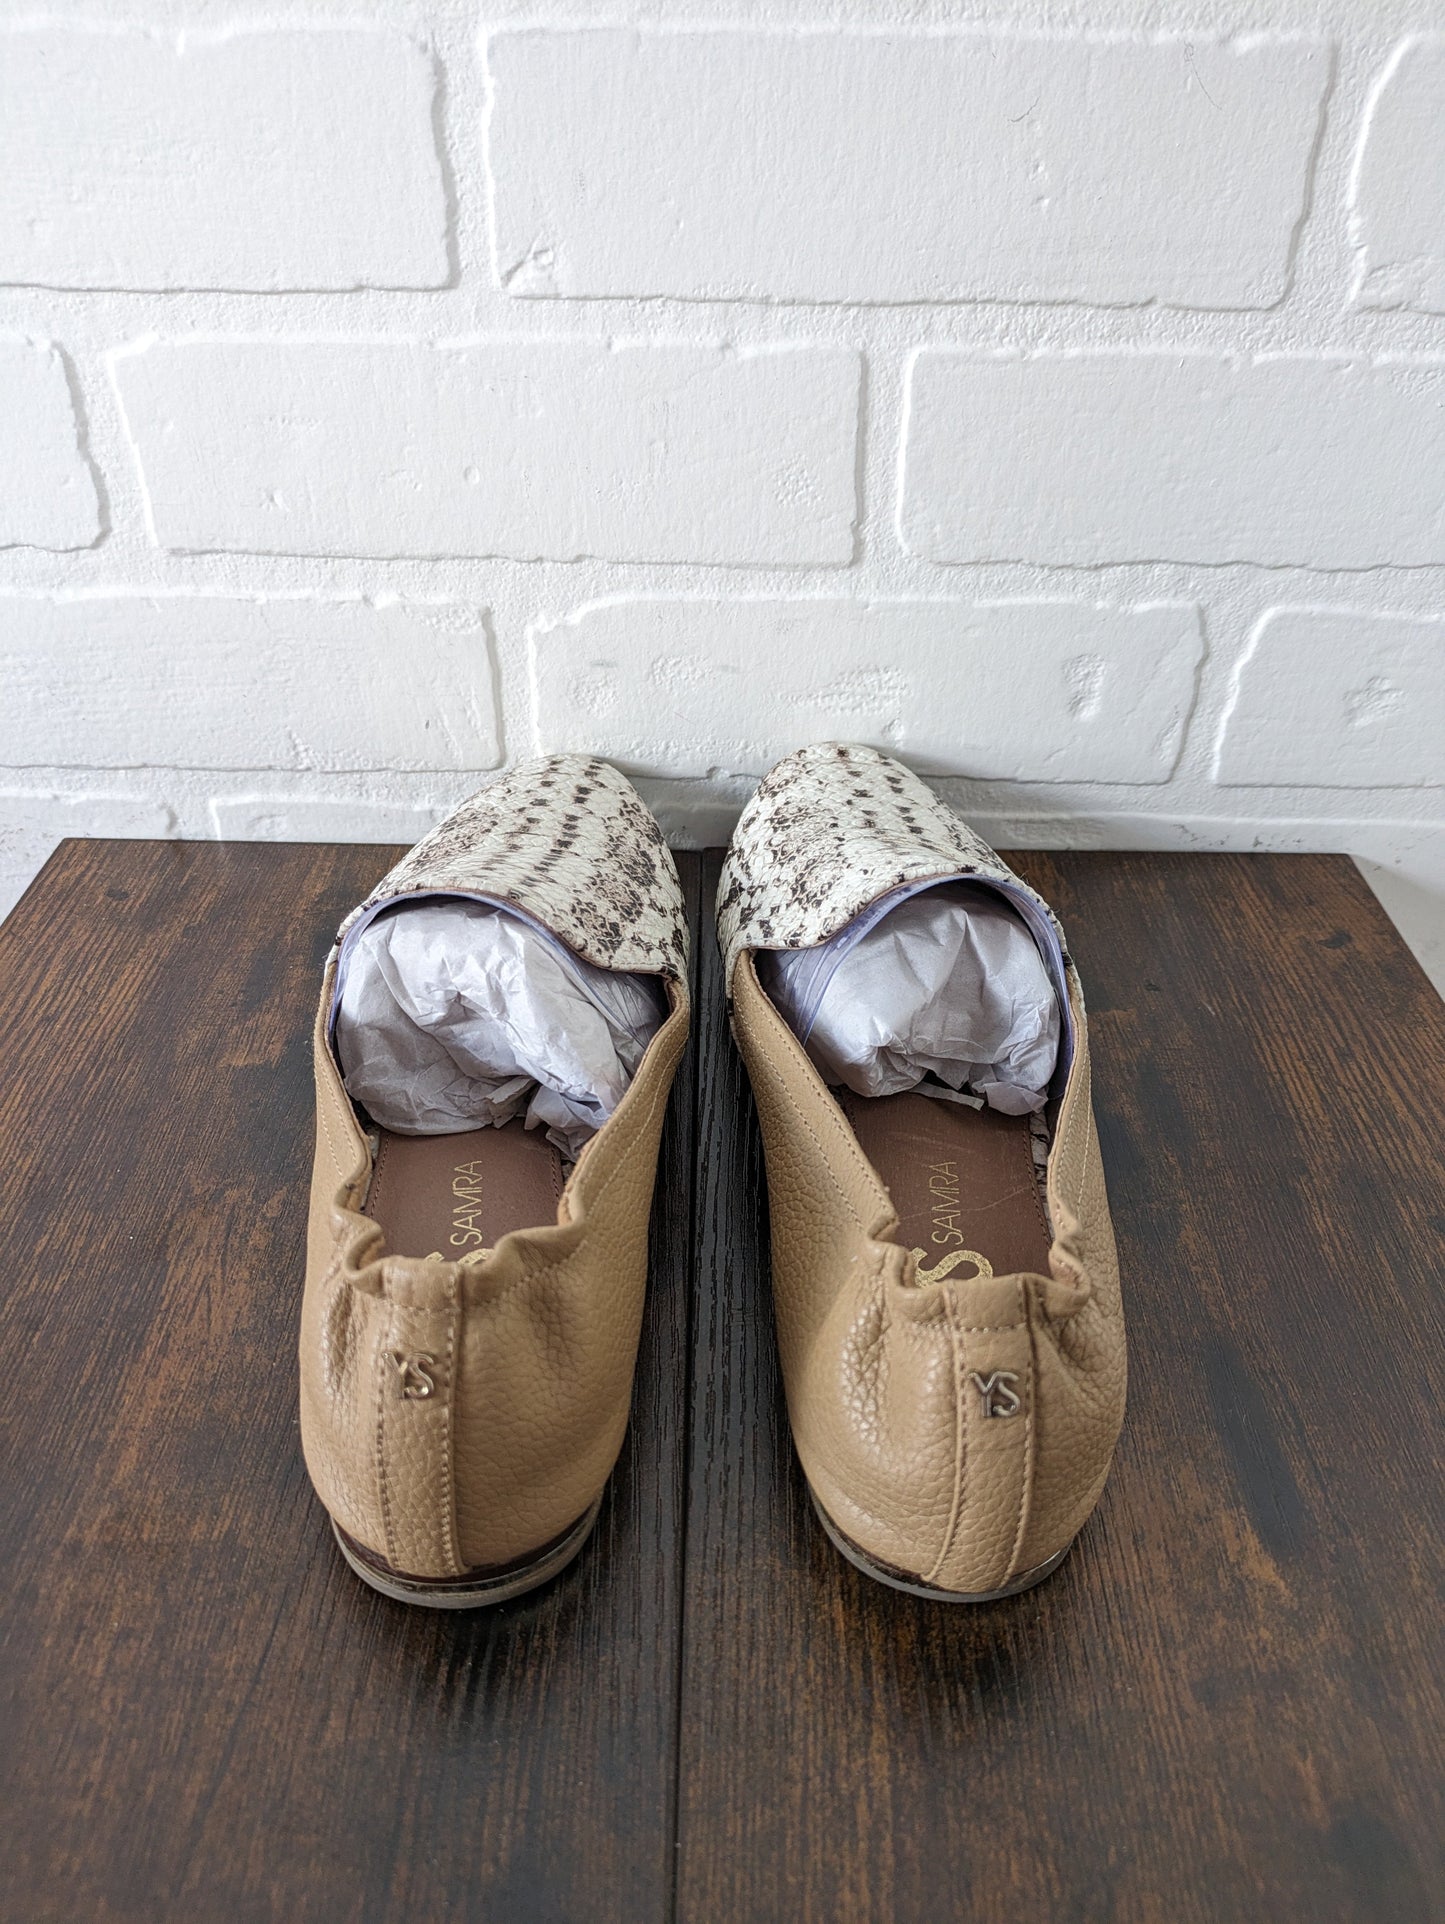 Shoes Flats Loafer Oxford By Cole-haan  Size: 9.5